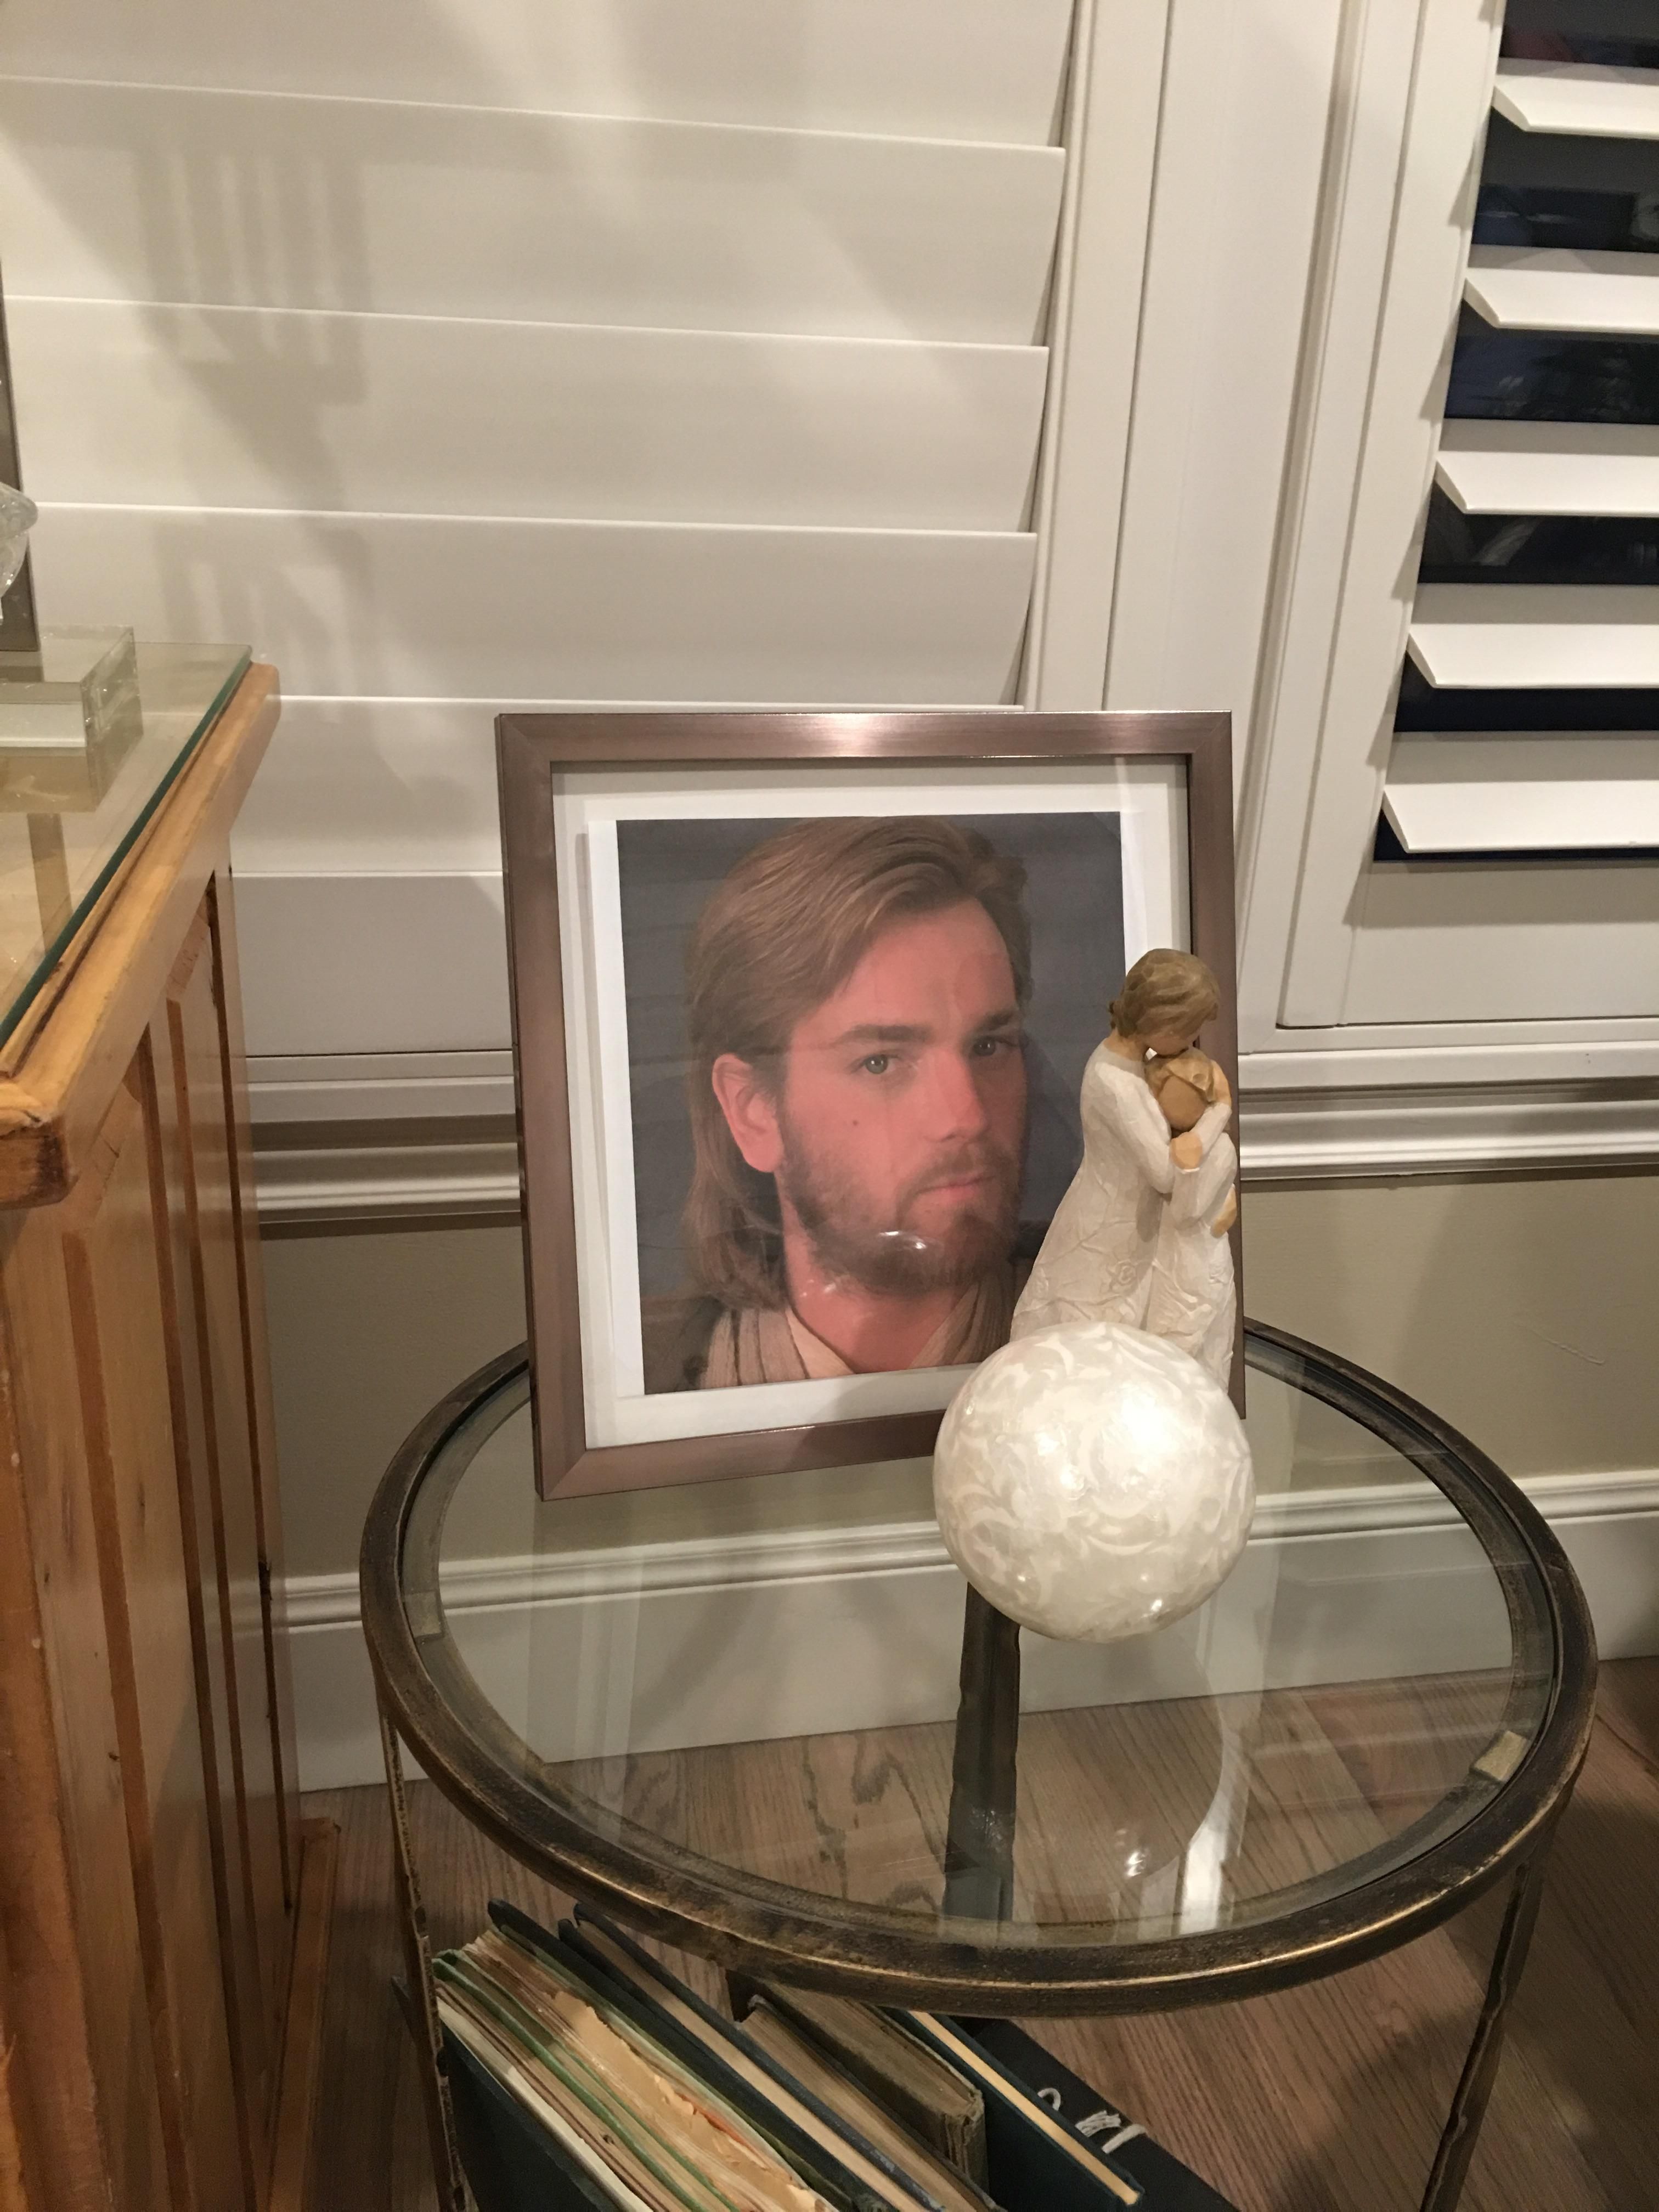 Shout out to my brother for replacing a picture of Jesus at my parent's house with a picture of Obi-Wan Kenobi as portrayed by Ewan McGregor. Three months and counting without them noticing.